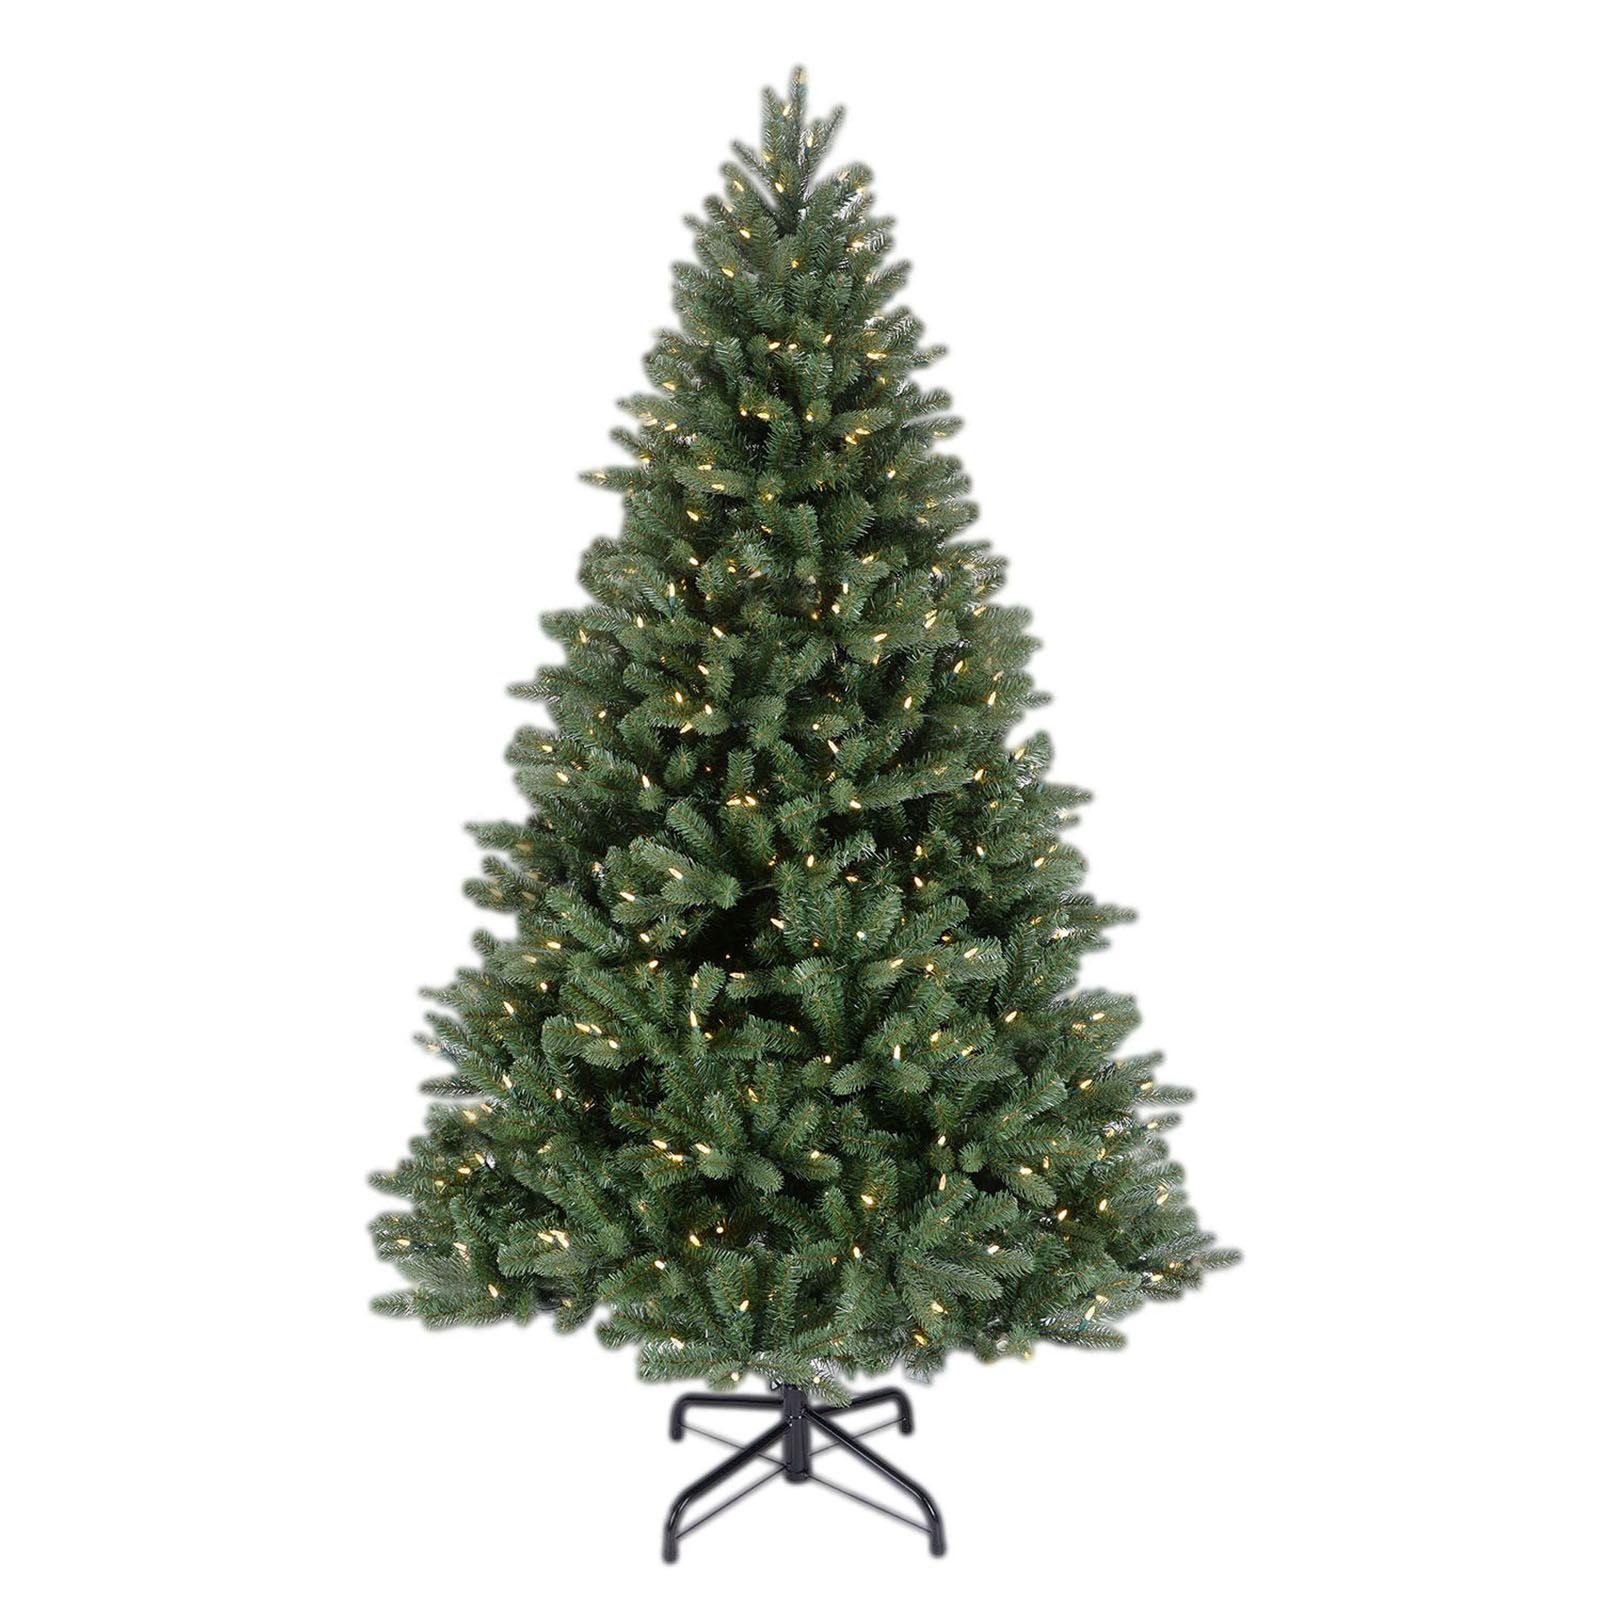 Sylvania 7 5 8 Function Color Changing Prelit Led Tree With Foot